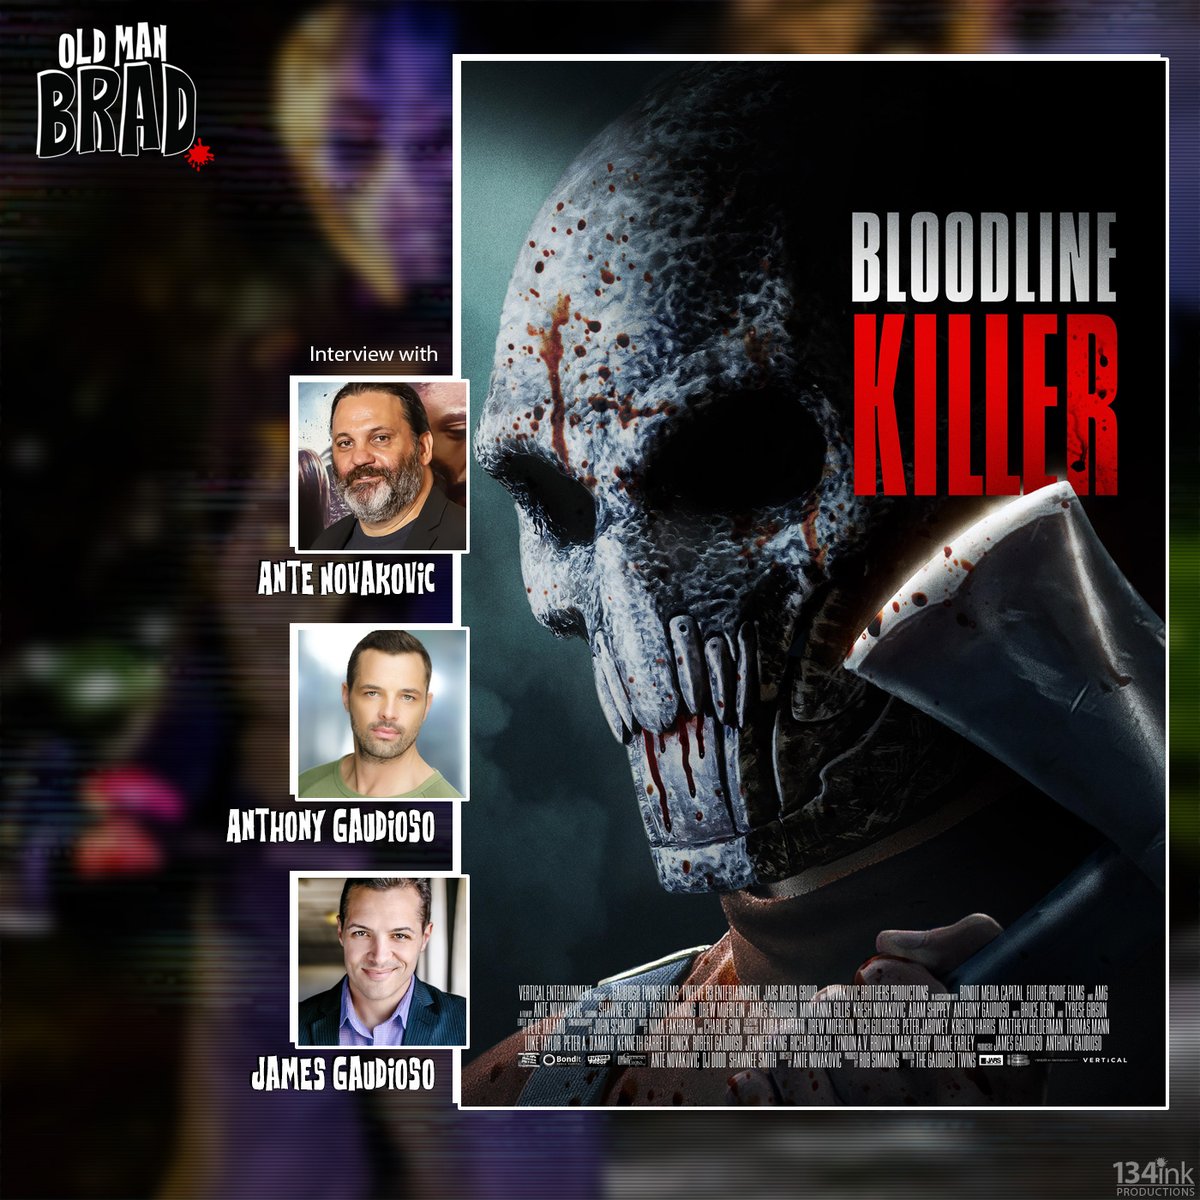 I have another great interview this week. Listen as I chat with Ante Novakovic and The Gaudioso Brothers about Bloodline Killer. Give it a listen on your favorite #podcast app! #bloodlinekiller #horrorpodcast #indiepodcast 
⬇️
linktr.ee/oldmanbrad